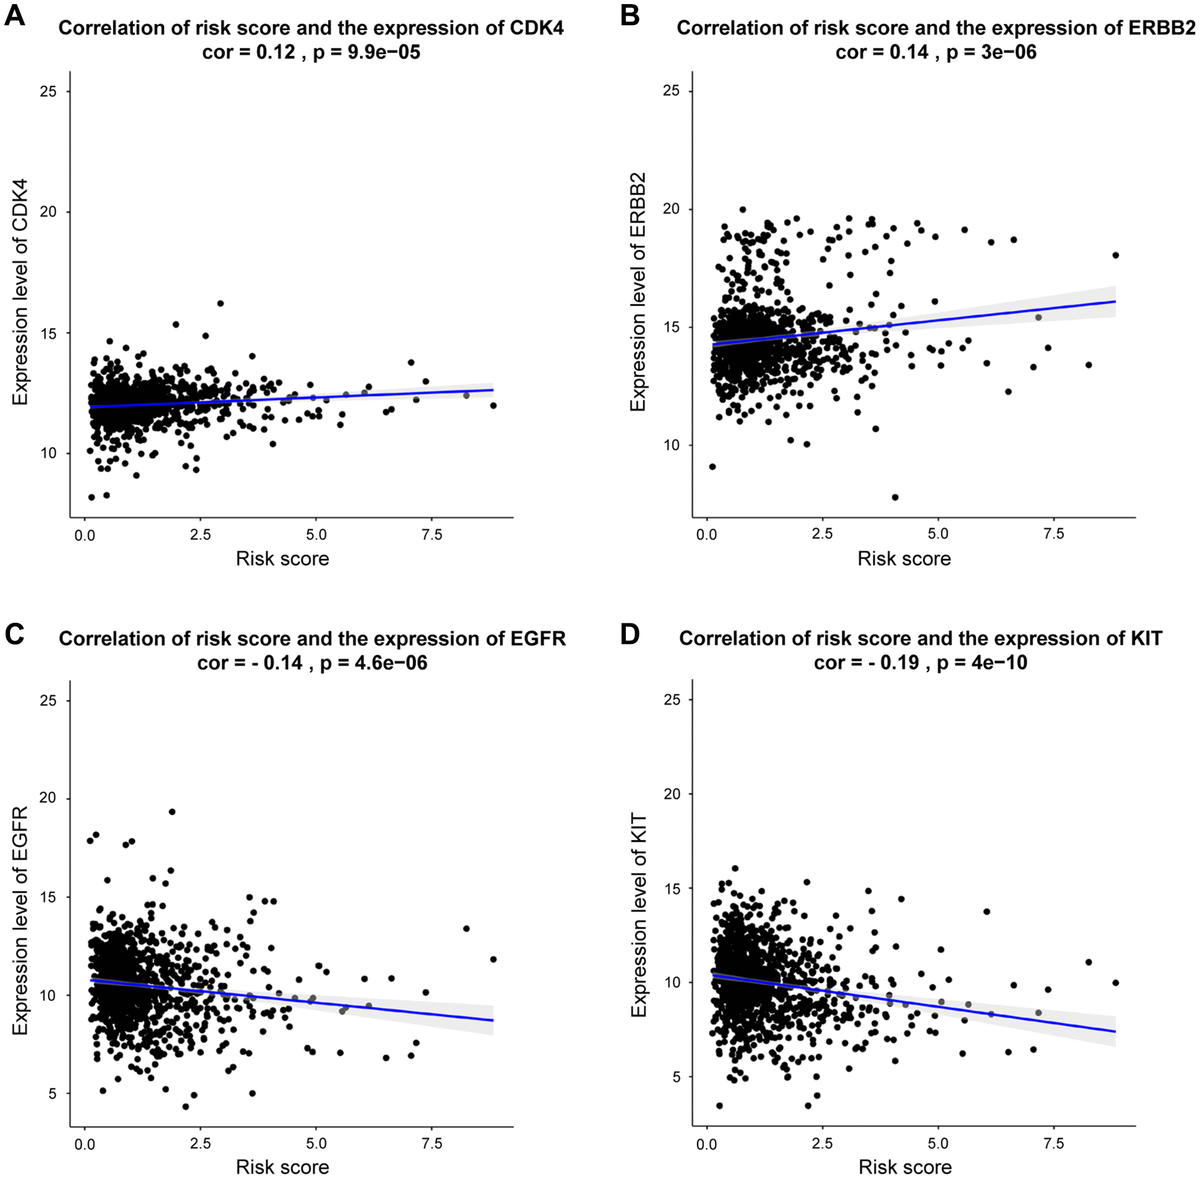 Correlation between risk score and genes expression for targeted treatment in BRCA. (A–D) Correlation analysis shows the results of CDK4, ERBB2, EGFR, KIT, respectively.